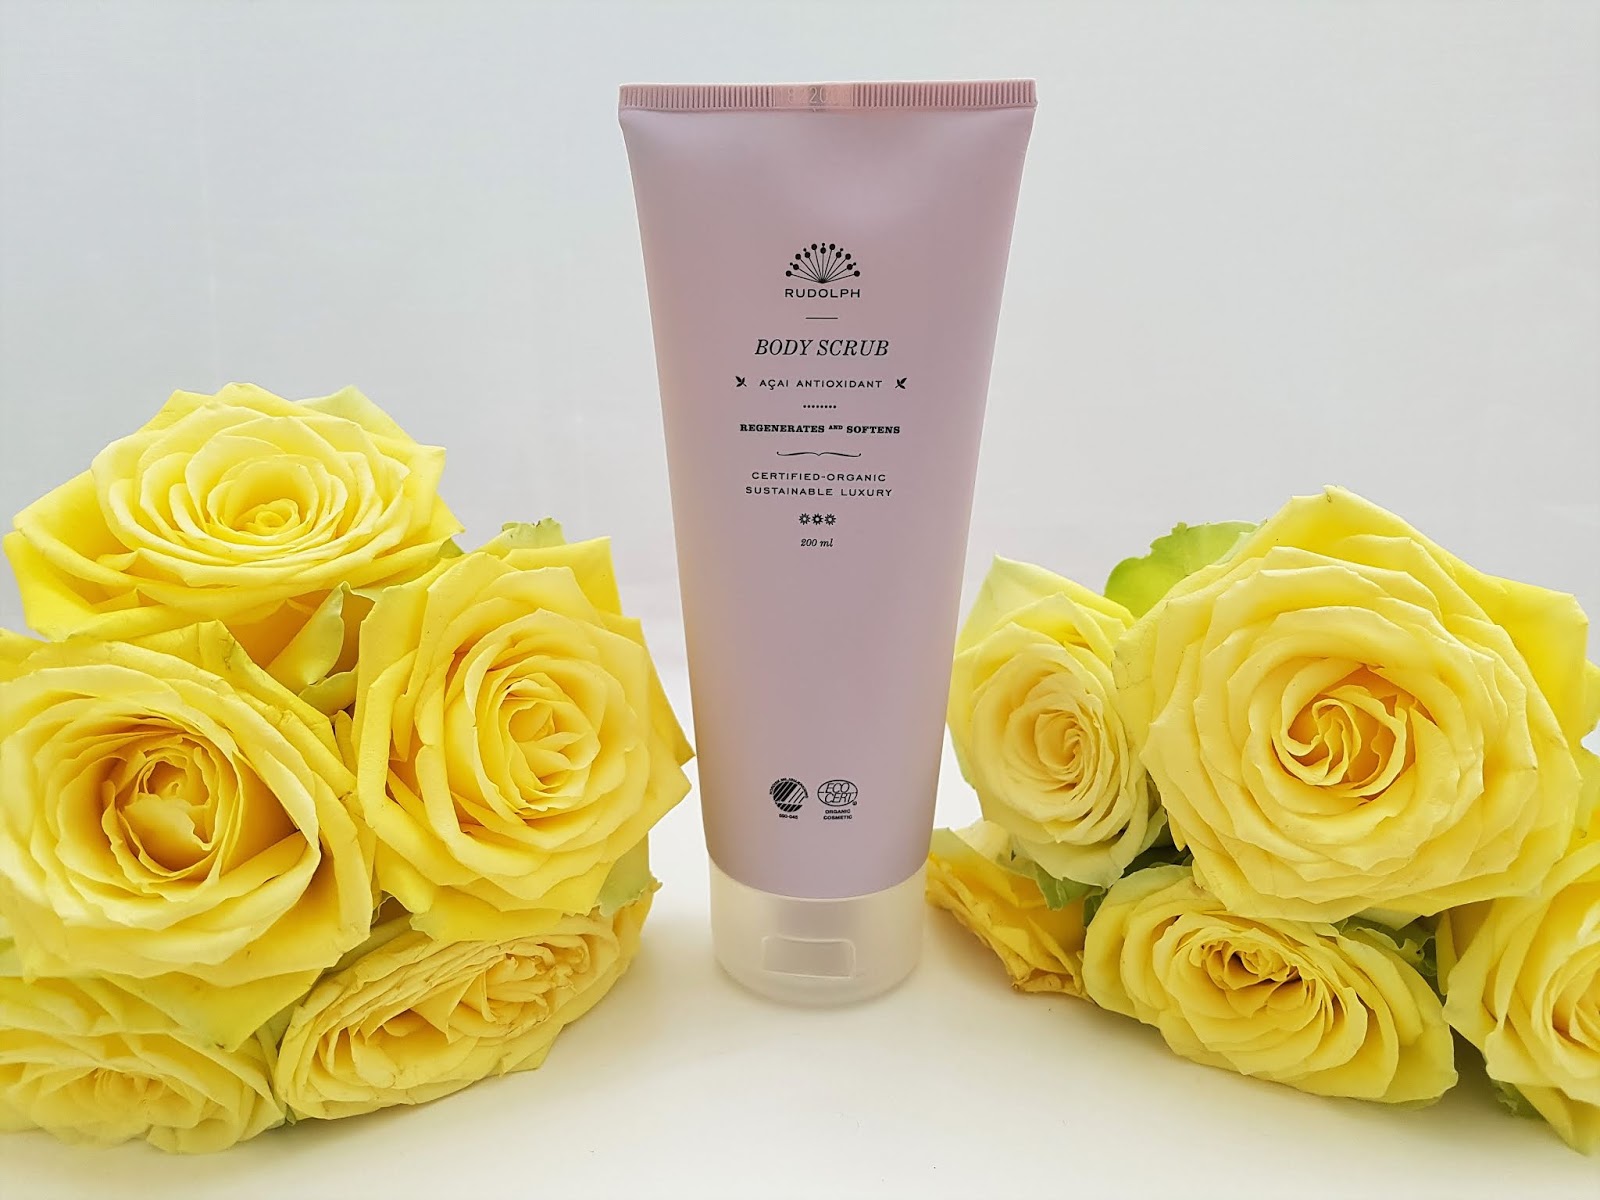 EXCLUSIVE BEAUTY DIARY : RUDOLPH ACAI BODY SCRUB CLINIQUE DEEP COMFORT BODY LOTION